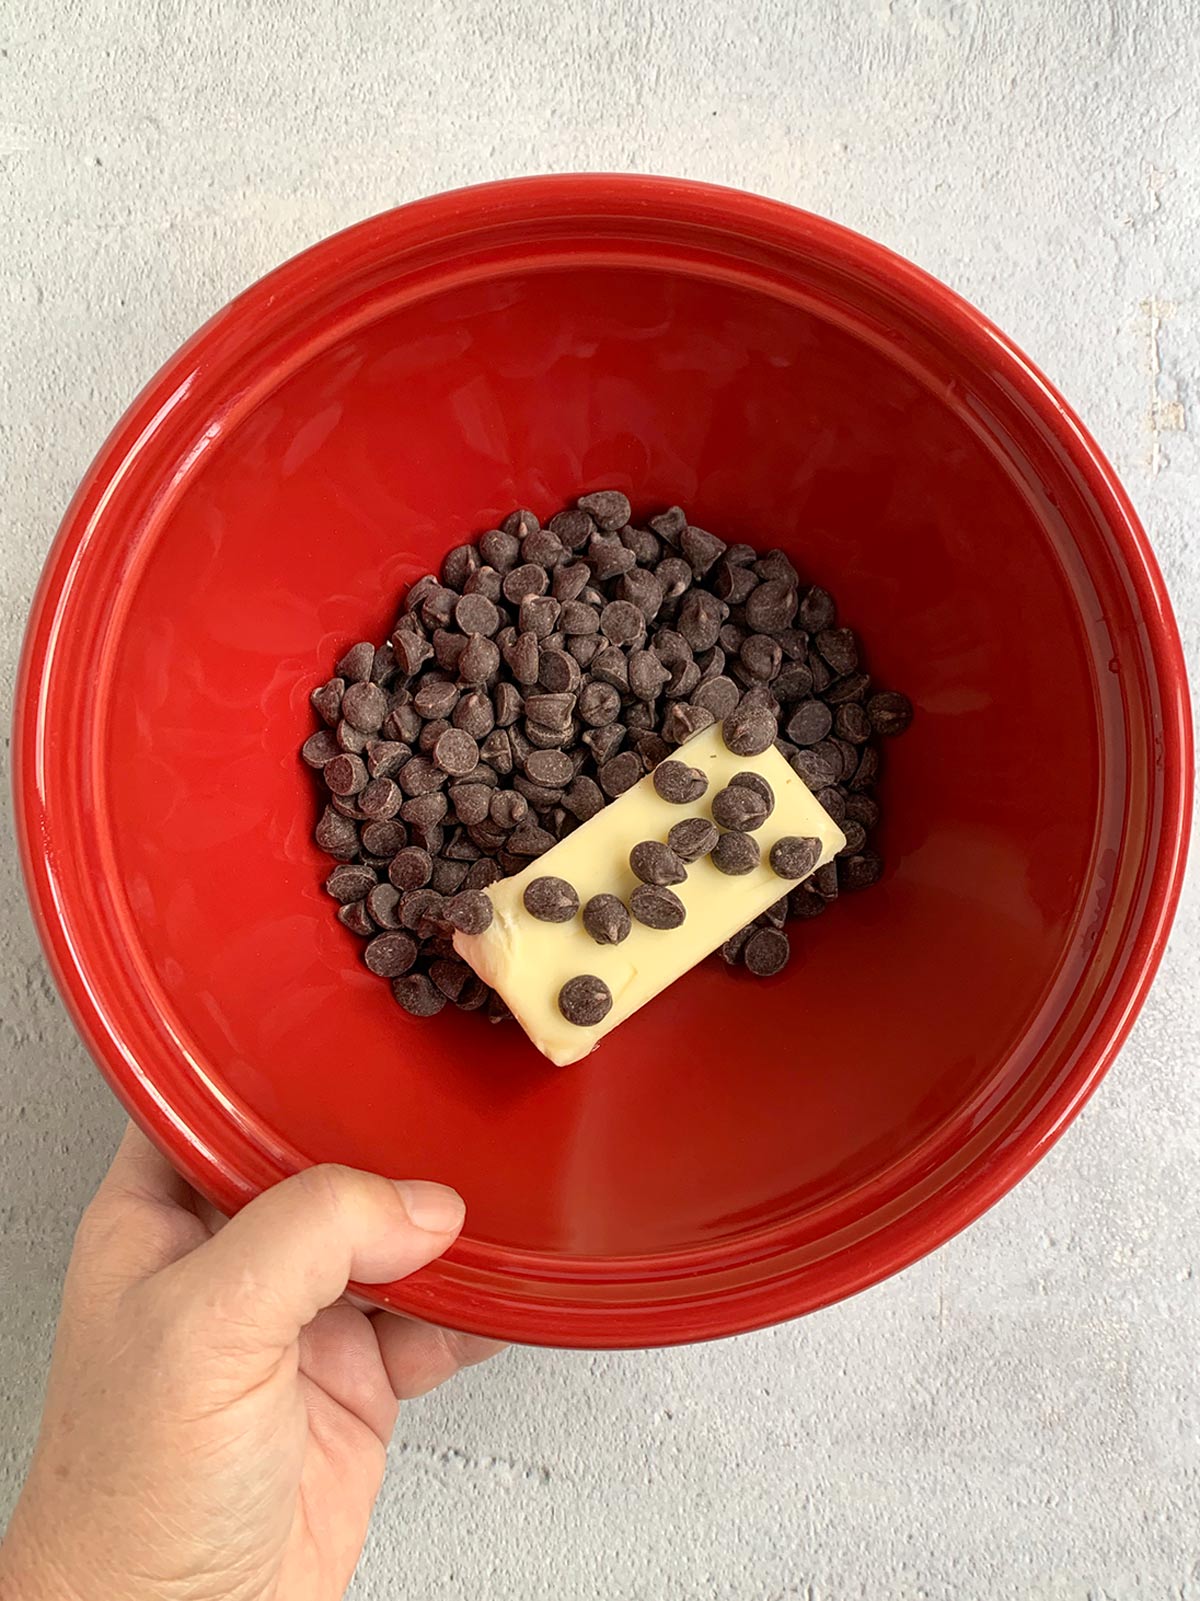 Chocolate chips and butter unmelted in a red bowl.